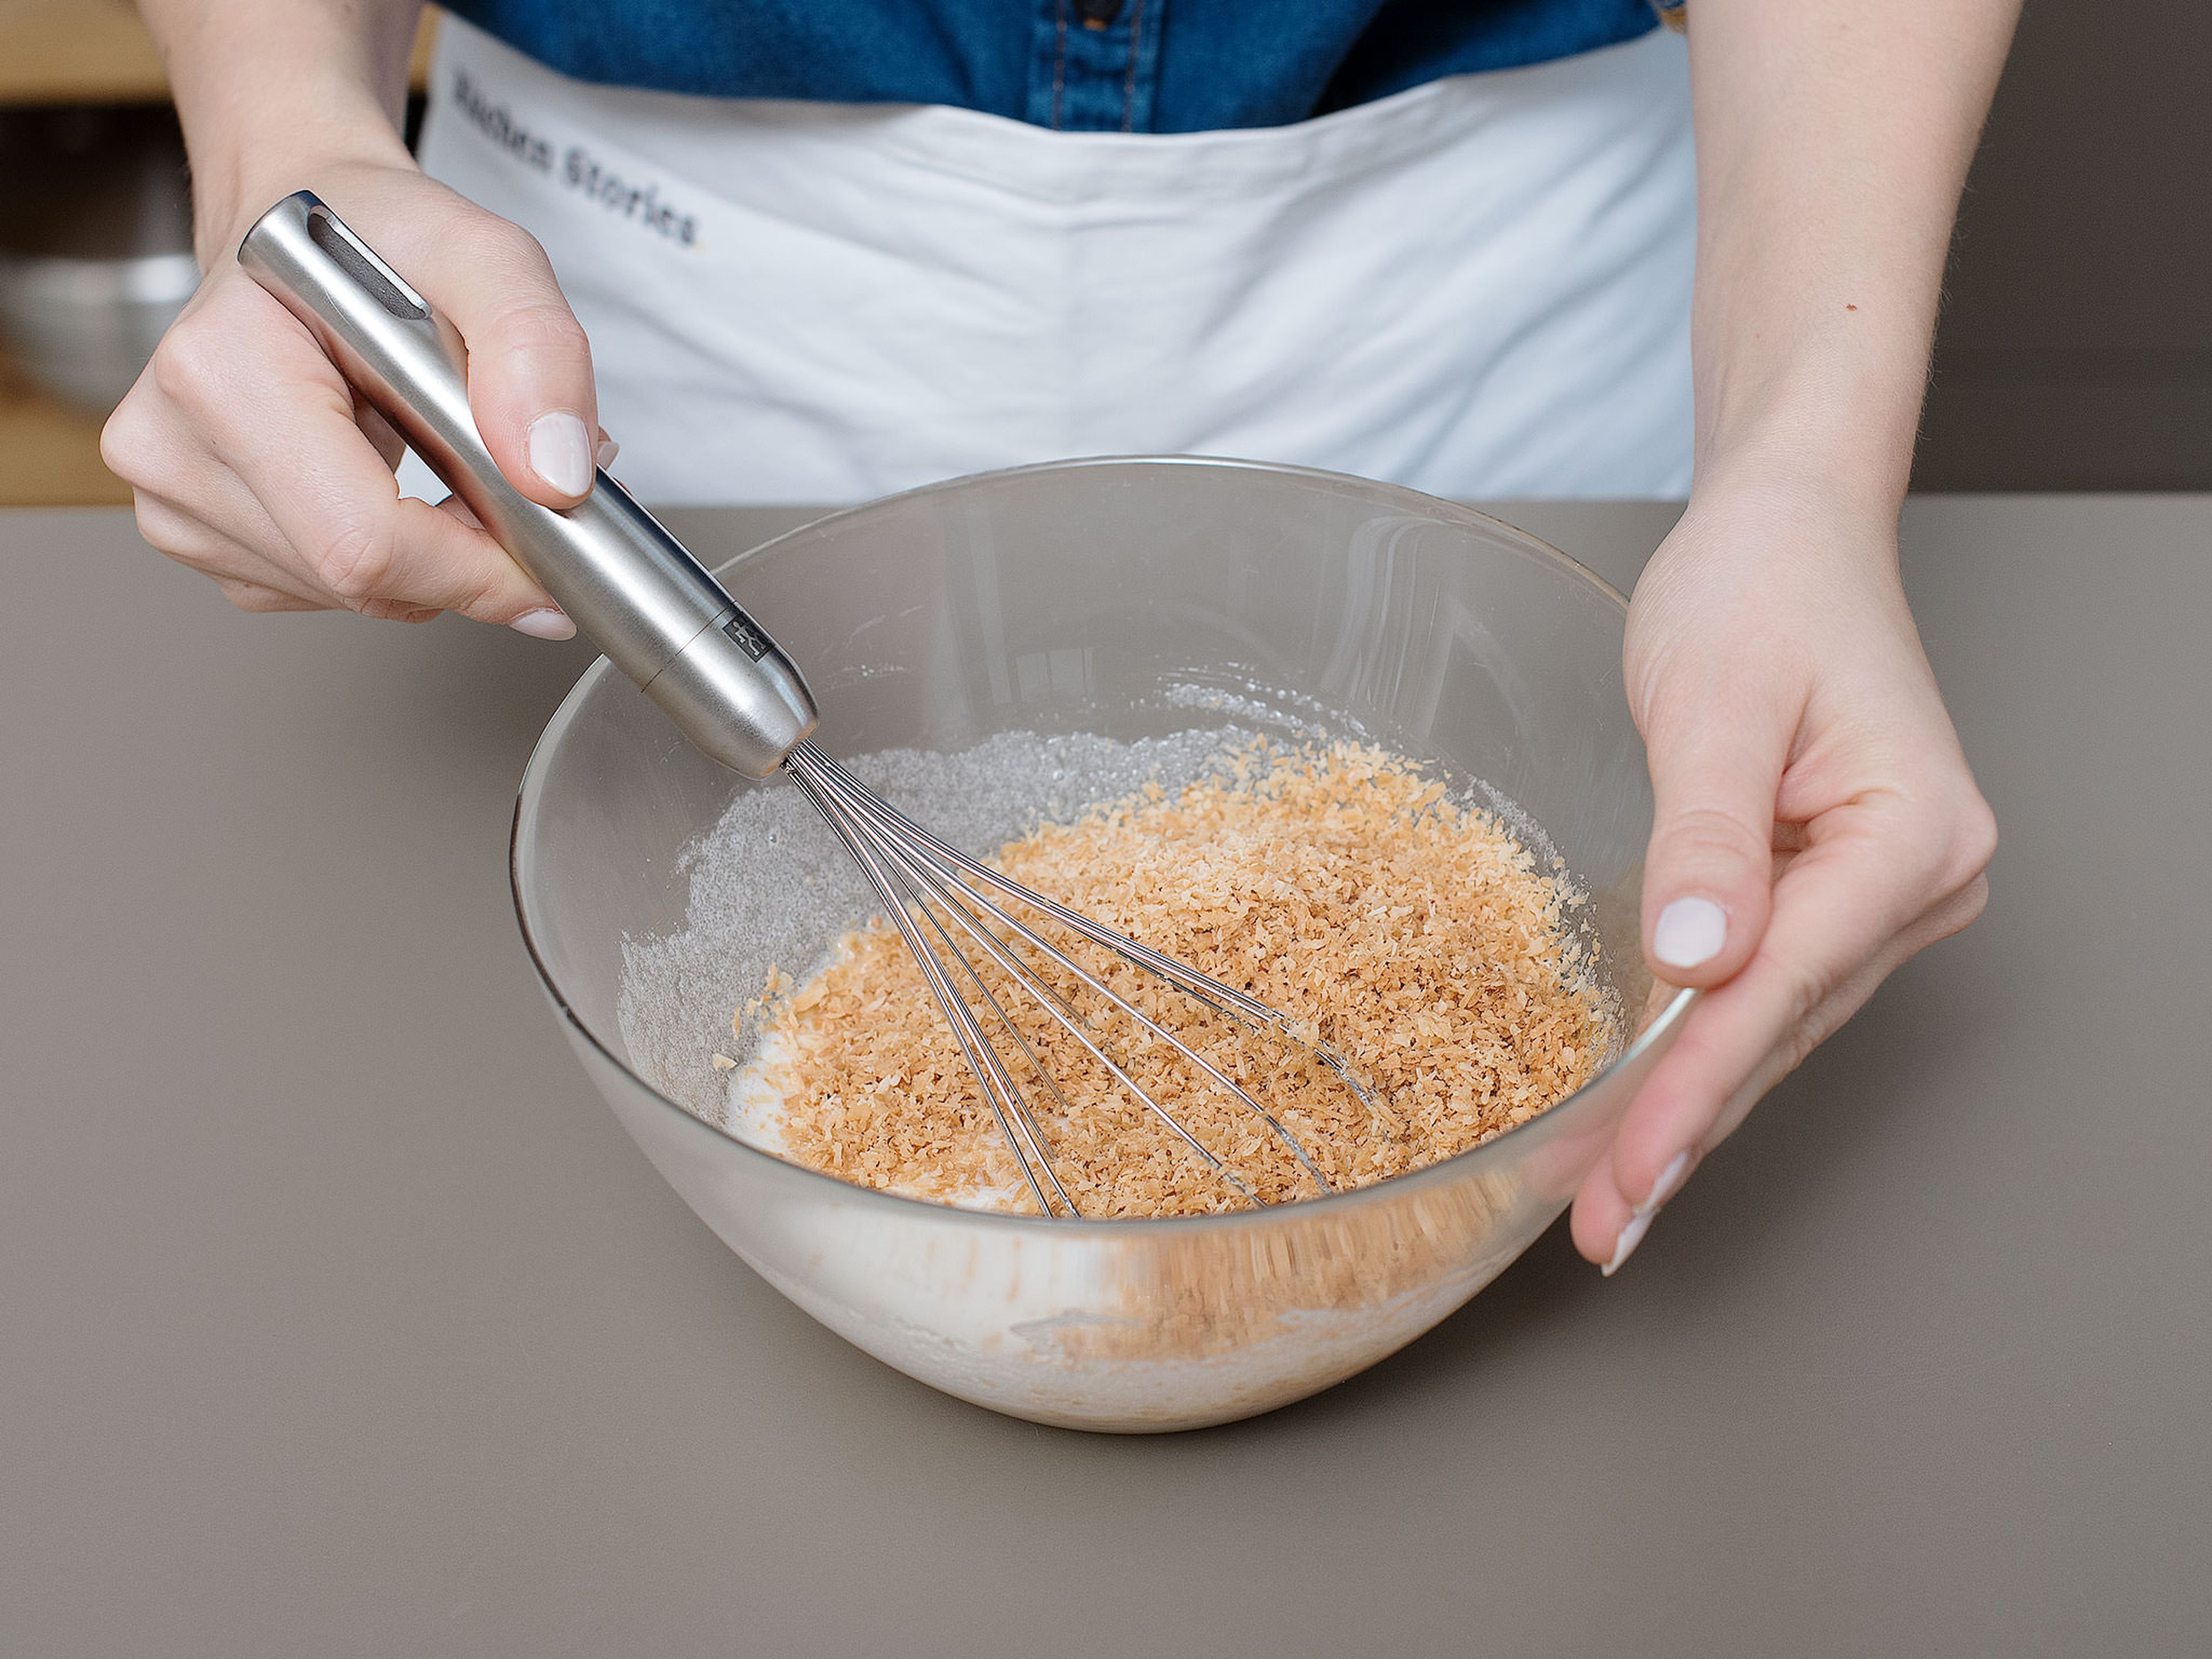 In a large bowl, beat egg whites, sugar, vanilla extract and salt. Add toasted coconut and combine. Cover bowl with plastic wrap and place in fridge for approx. 1 hr.